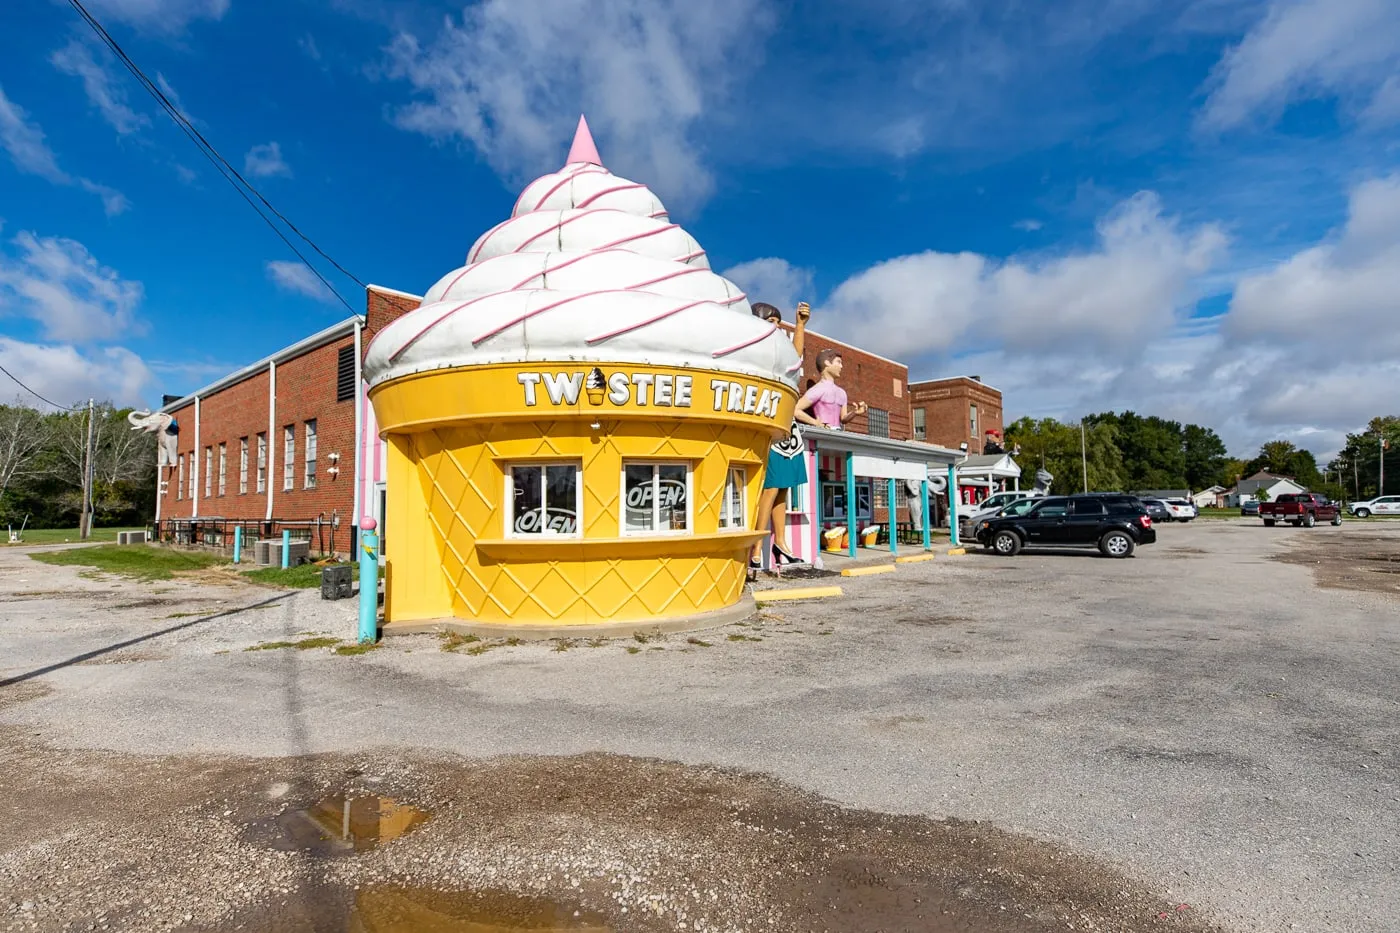 Twistee Treat ice cream shaped building at the Pink Elephant Antique Mall in Livingston, Illinois - Route 66 Roadside Attraction